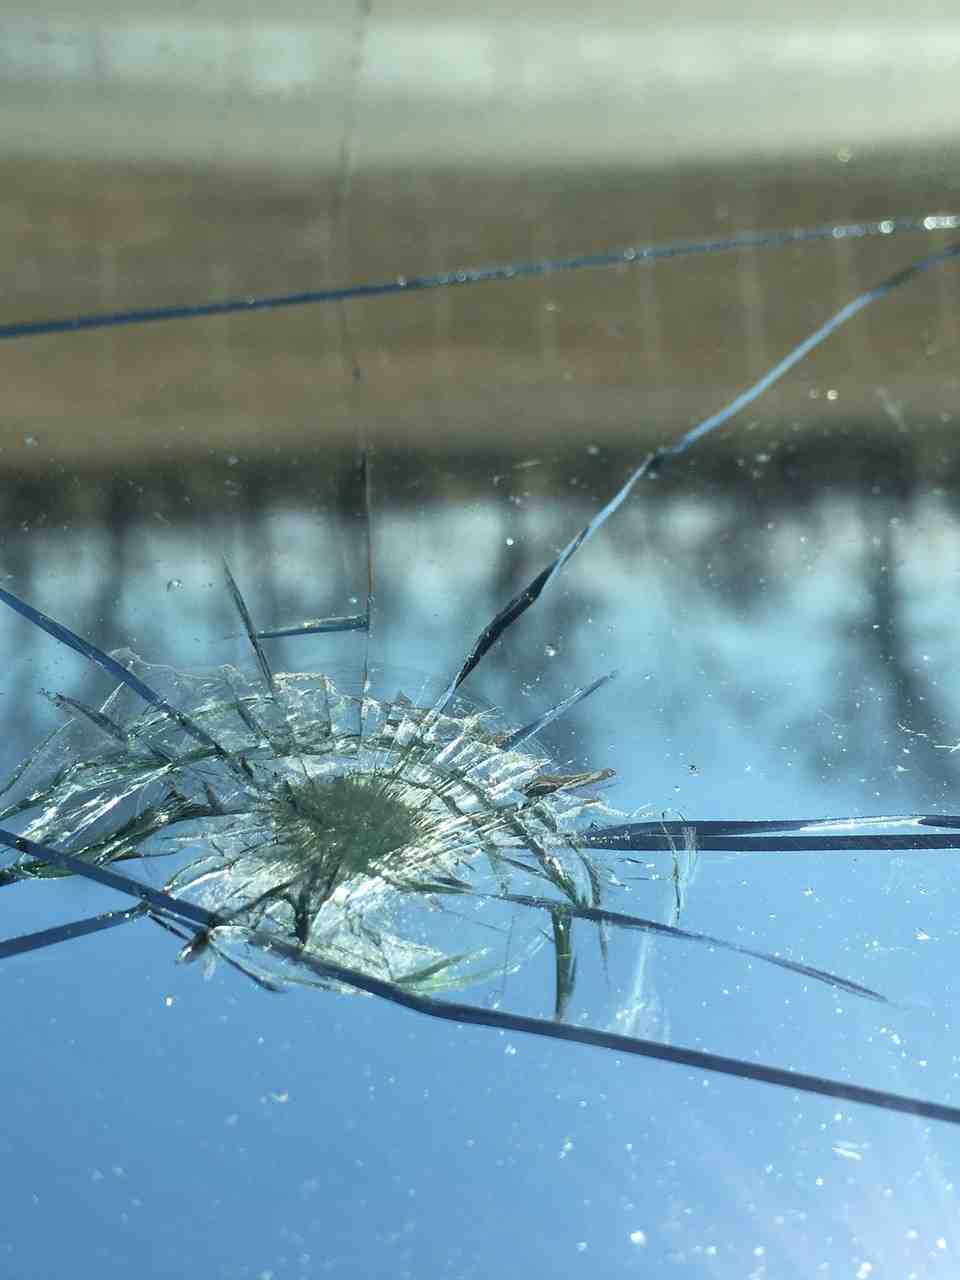 Does insurance cover windshield repair?